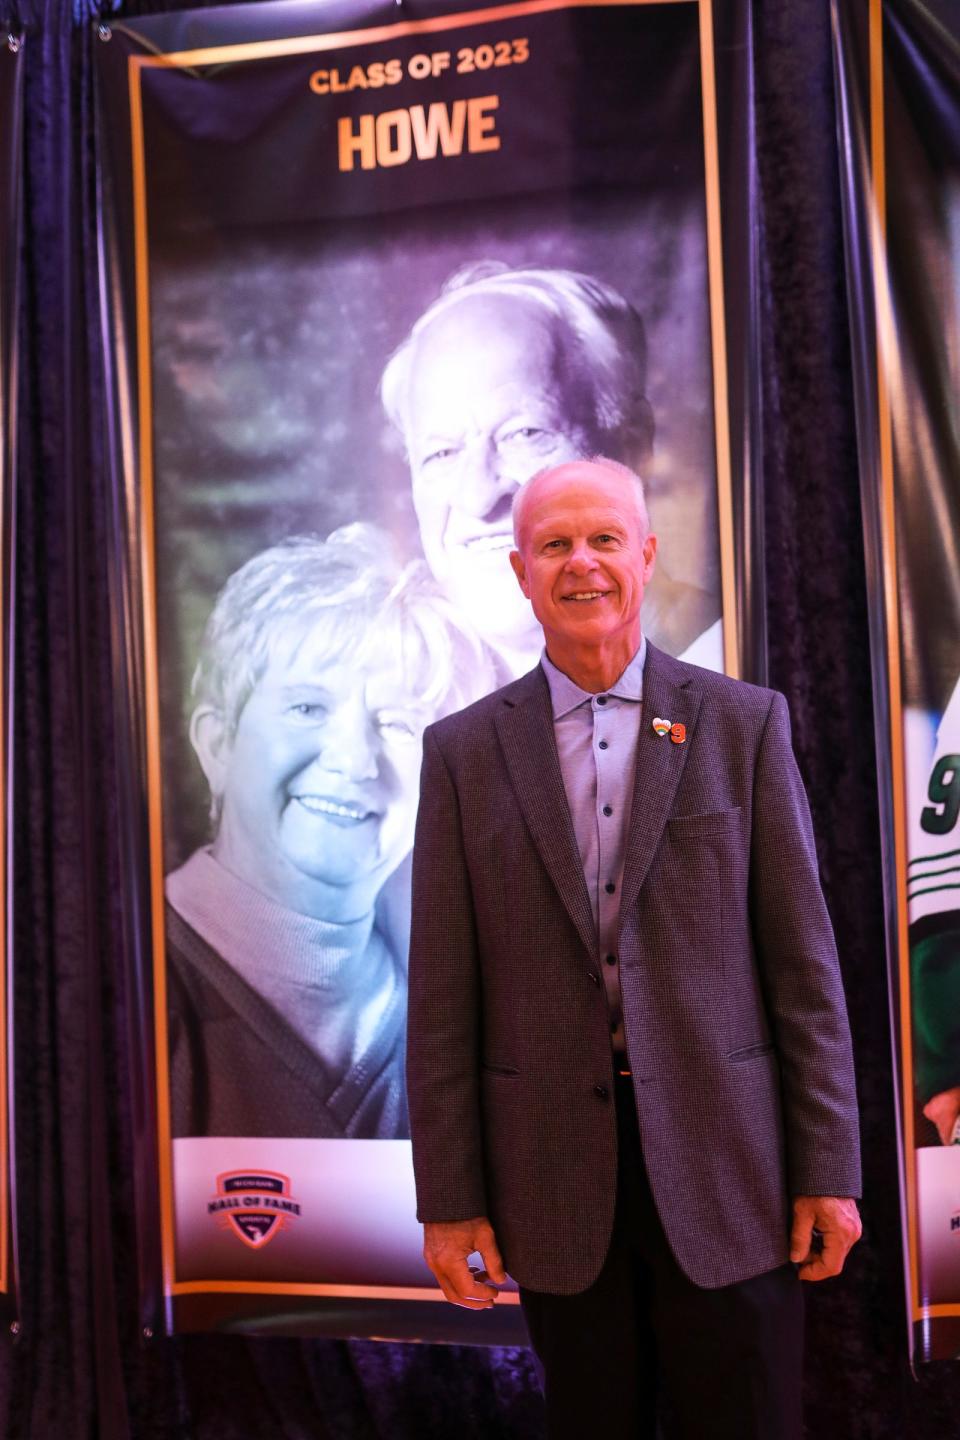 Mark Howe, son of Gordie and Colleen Howe, pose for a photo in front of a post of his parents during Michigan Sports Hall of Fame Class of 2023 induction ceremony at Soundboard Theater in Detroit on Thursday, Sept. 14, 2023.